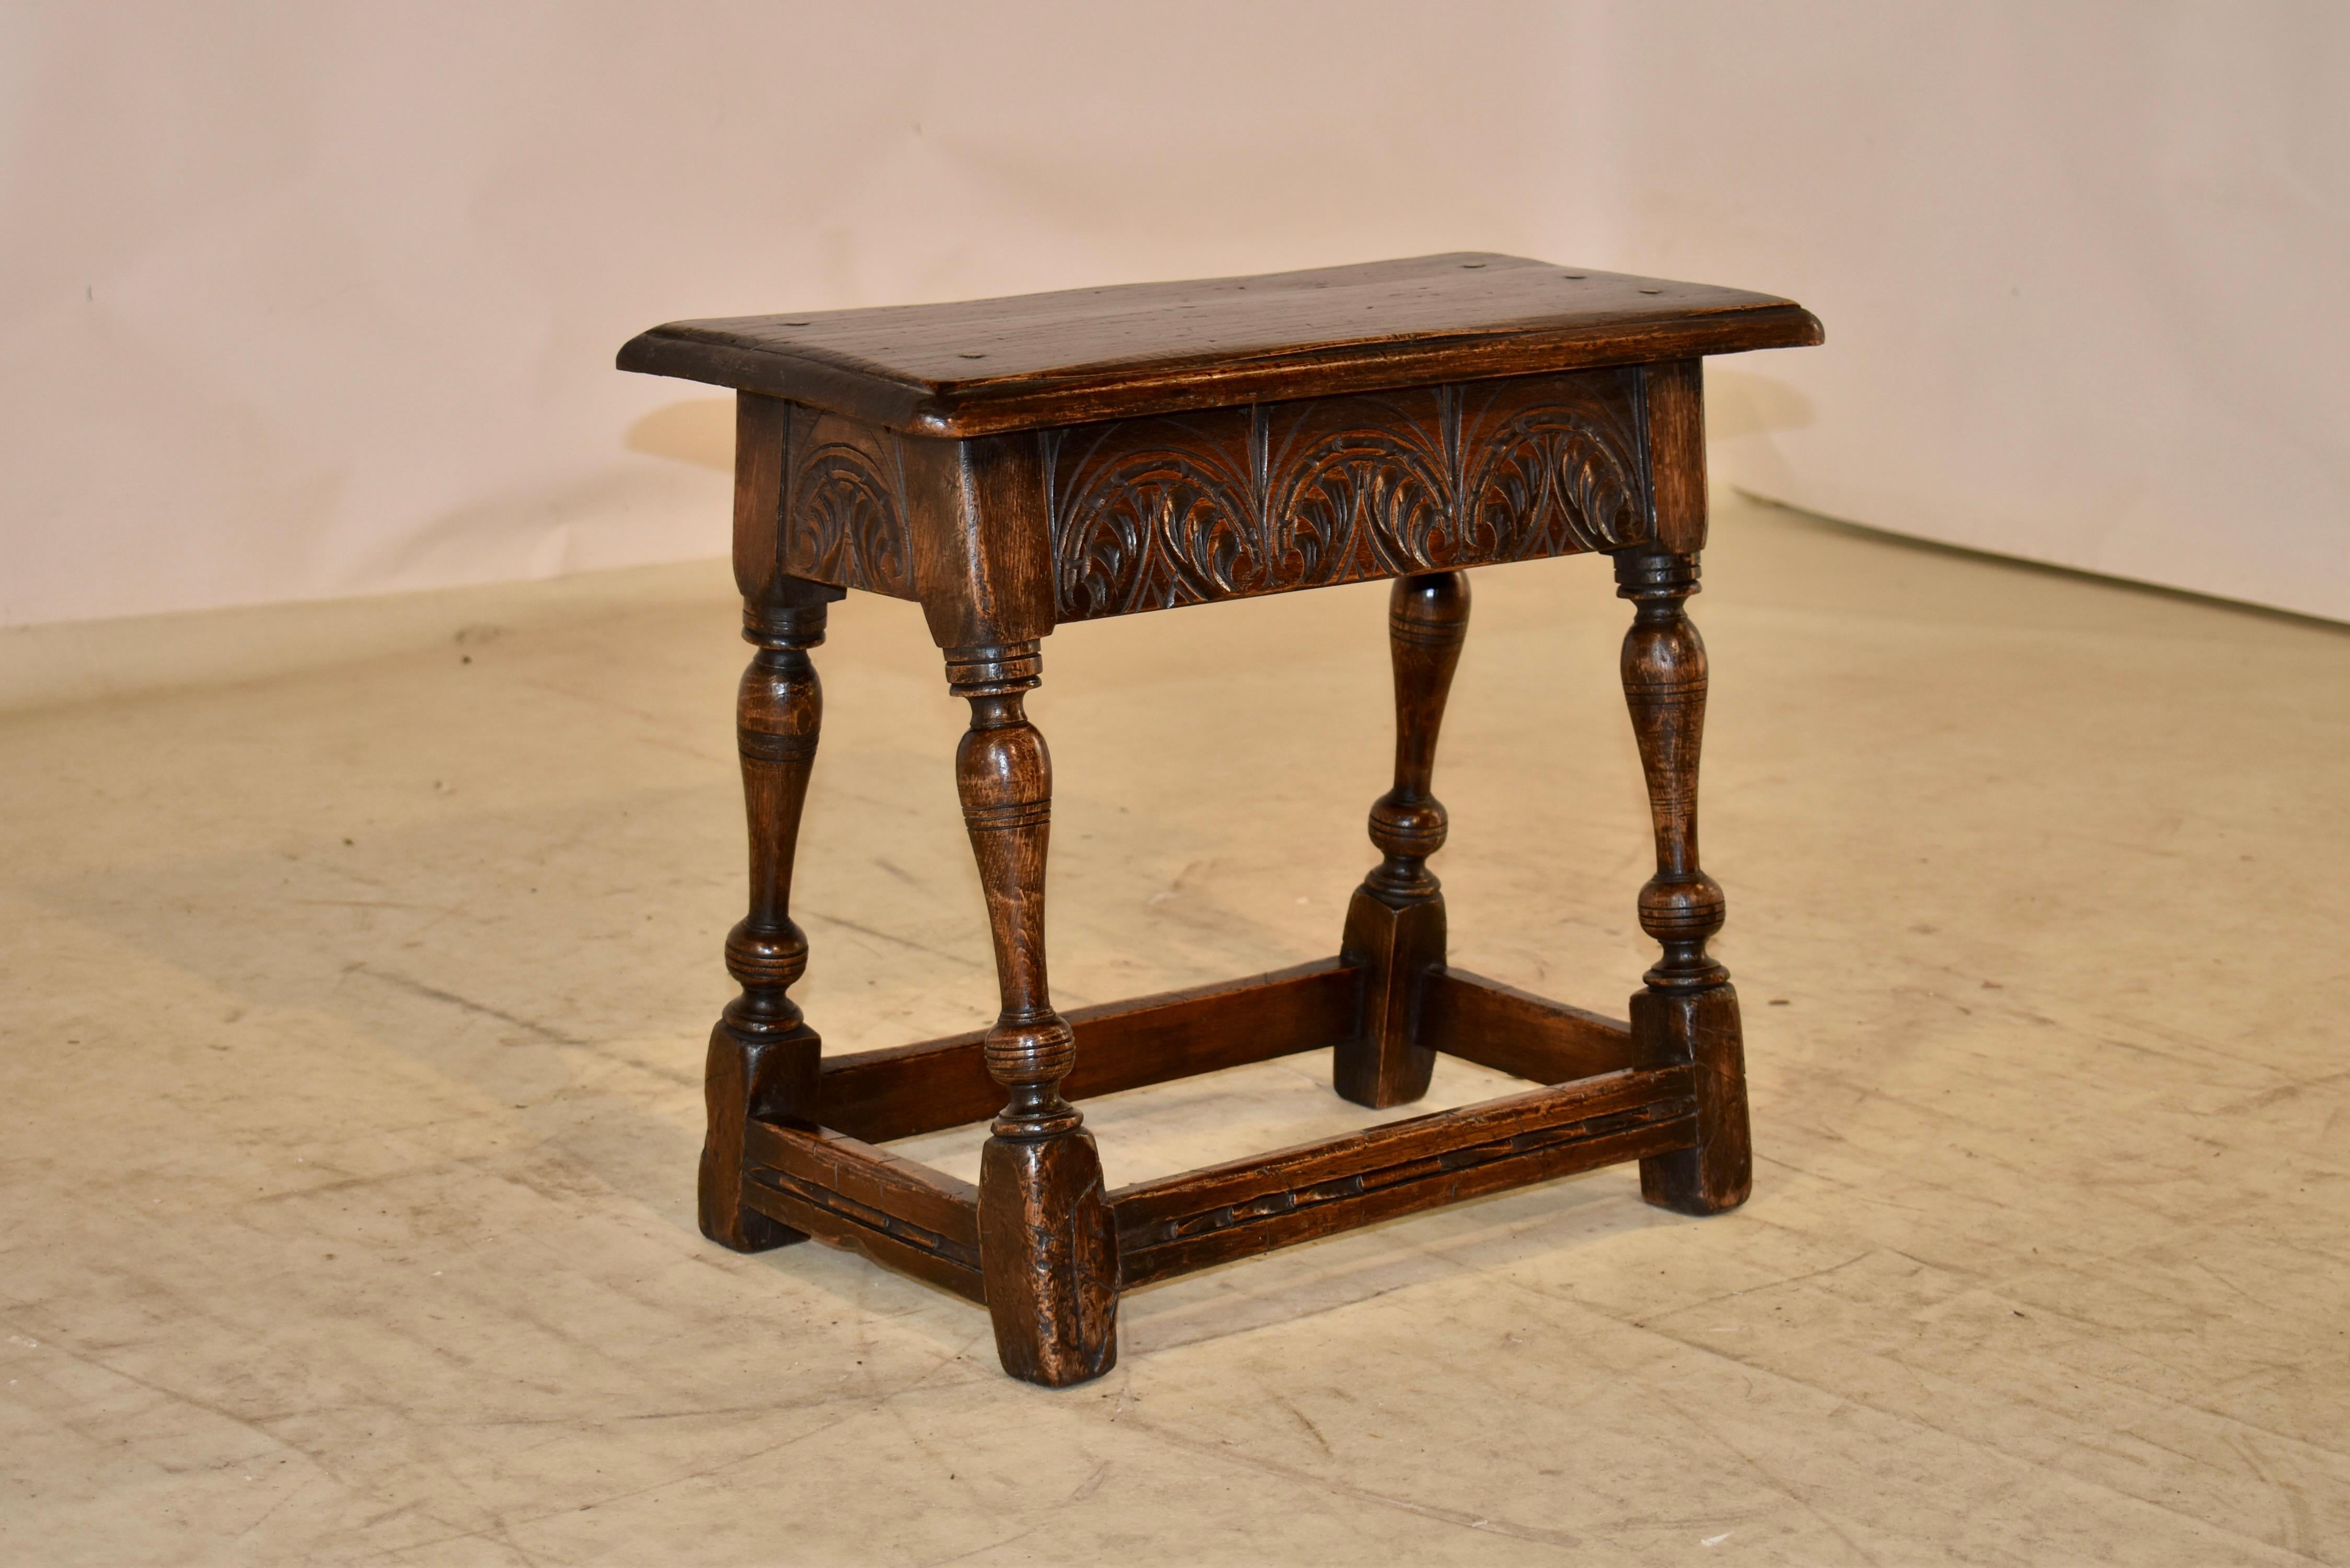 19th century Oak joint stool from England with a beveled edge around the top, which is also chamfered and of pegged construction. The apron is wonderfully hand carved on all four sides for easy placement in any room. The stool is supported on hand